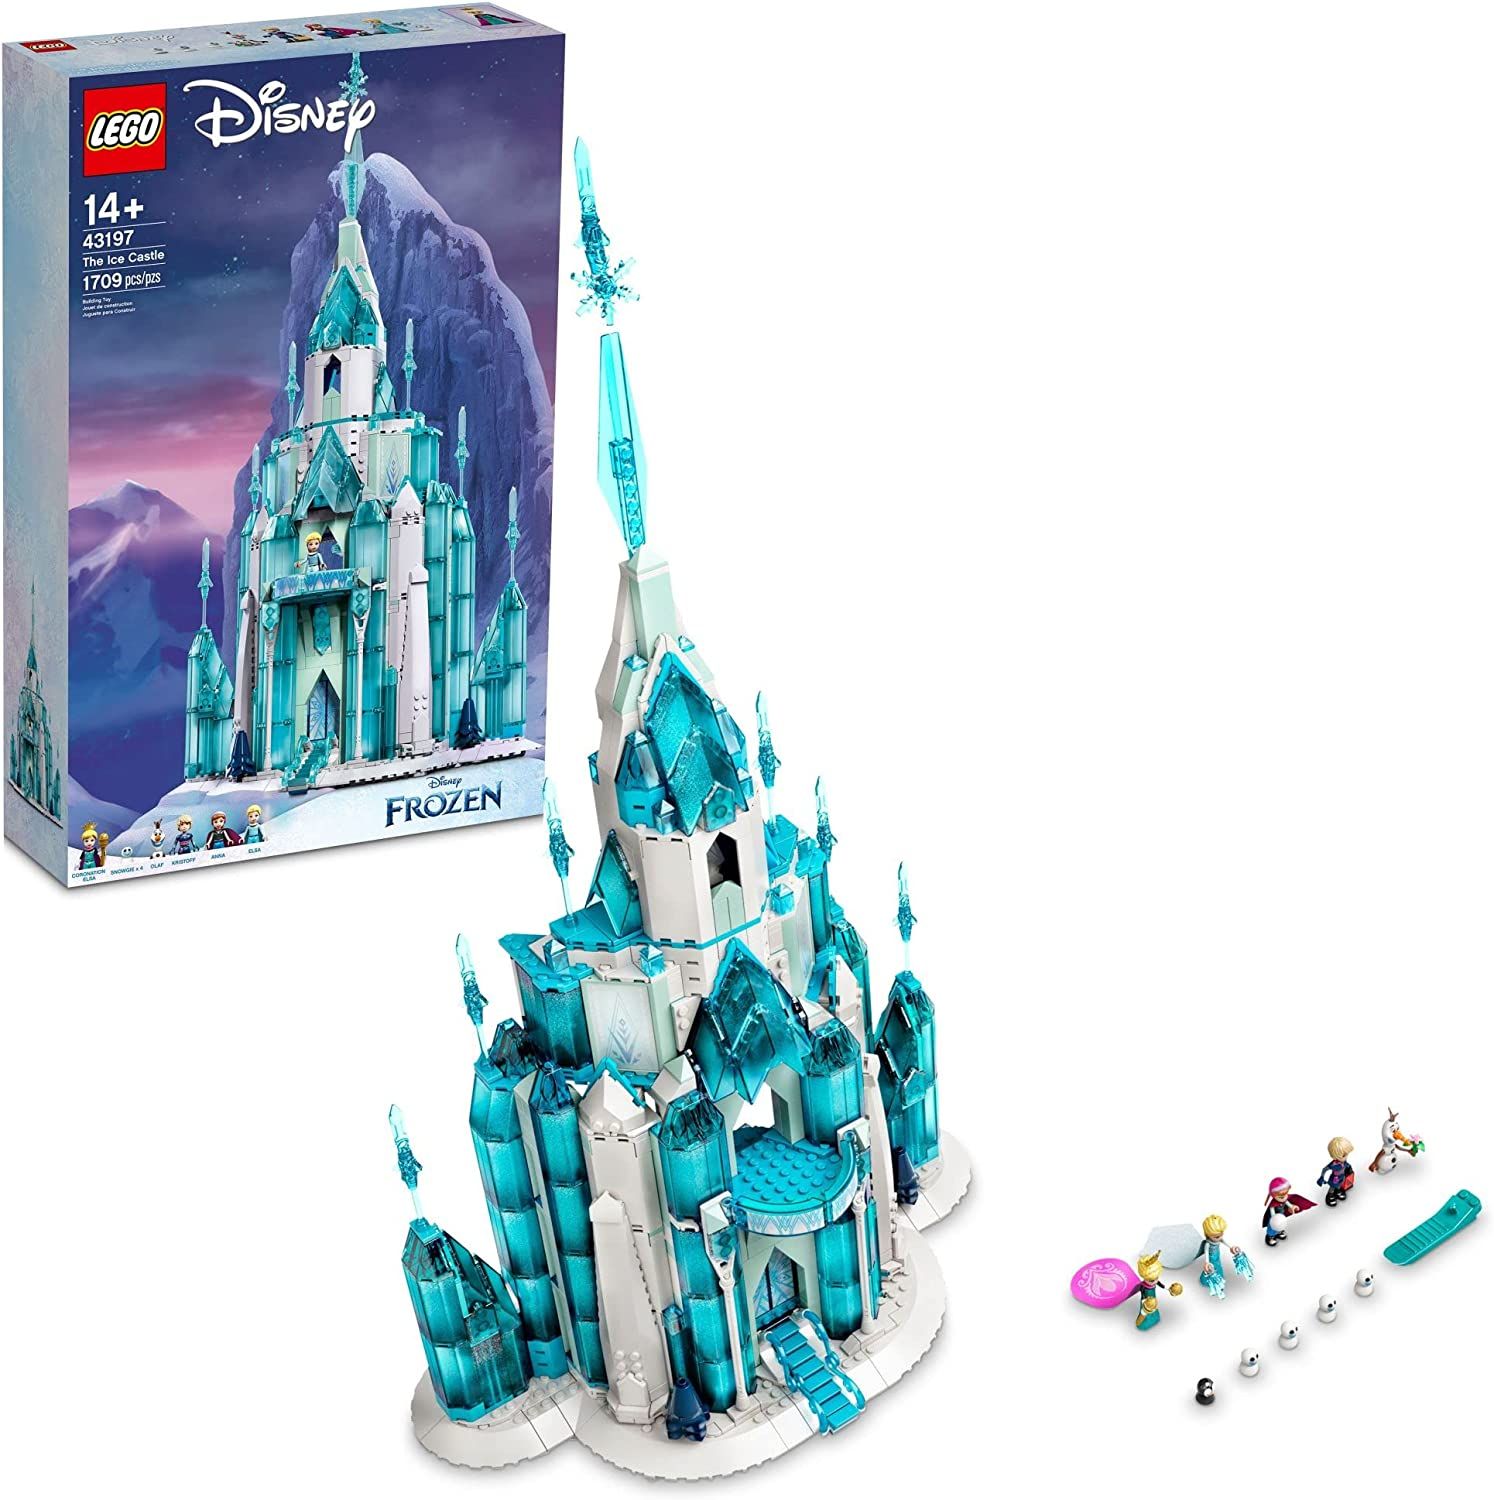 LEGO Disney Princess Frozen Ice Castle is one of the best Disney Collectibles